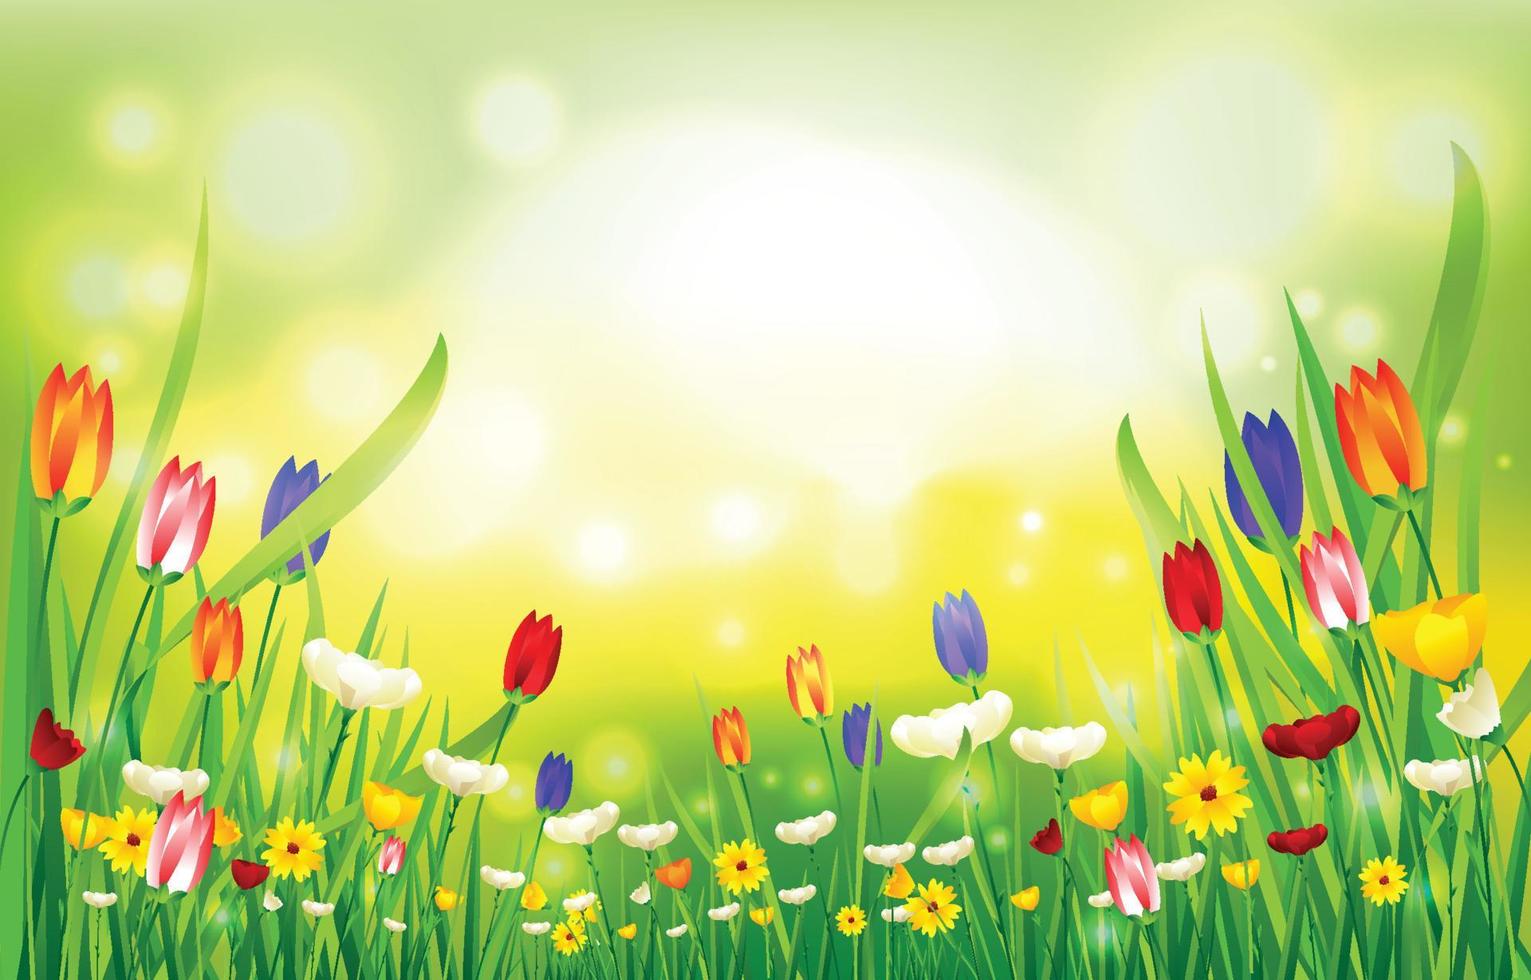 Nature Spring Background Concept vector